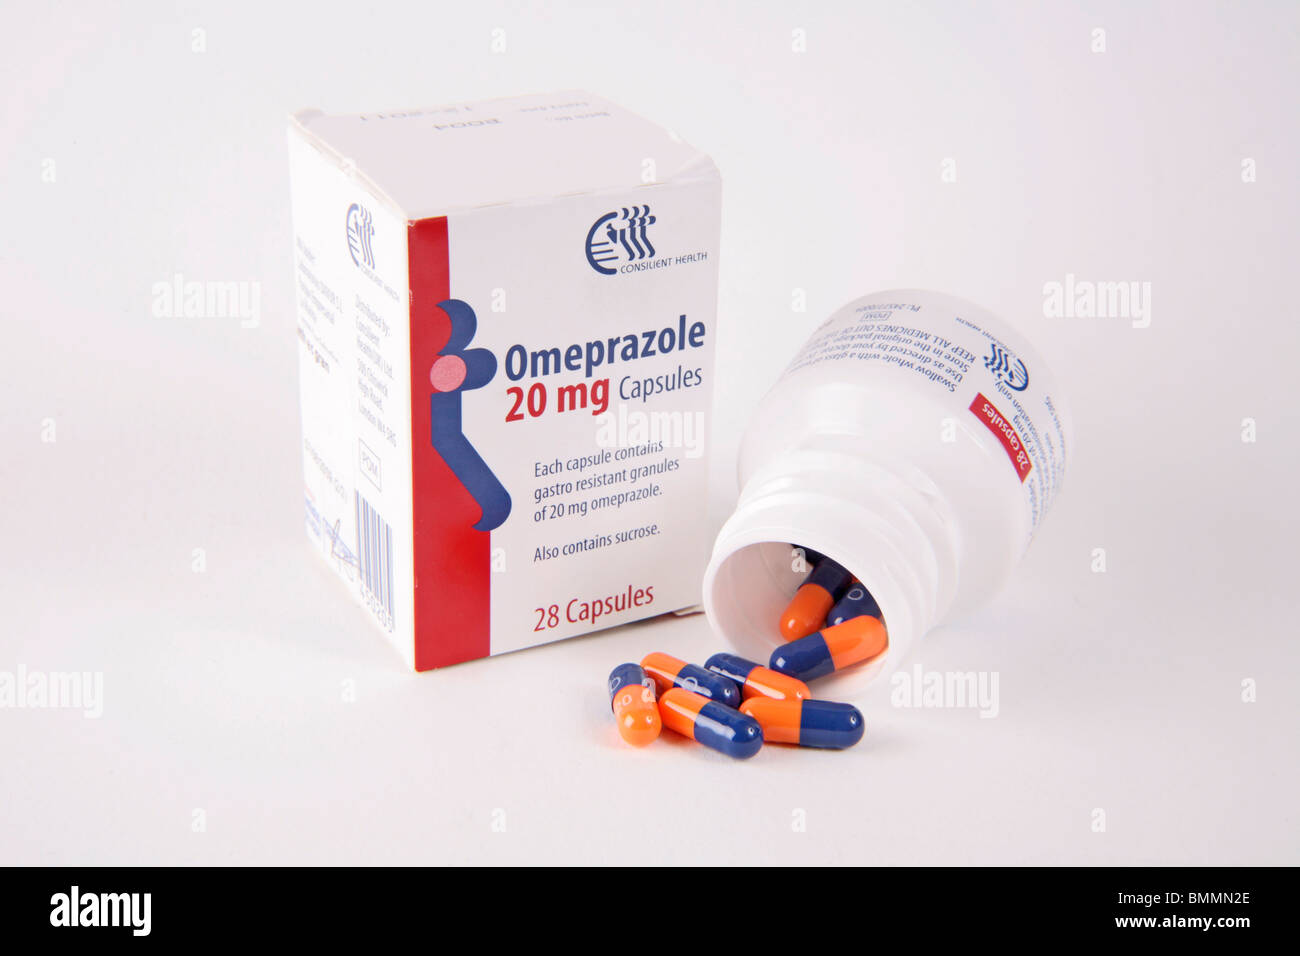 does omeprazole cure gastric ulcers